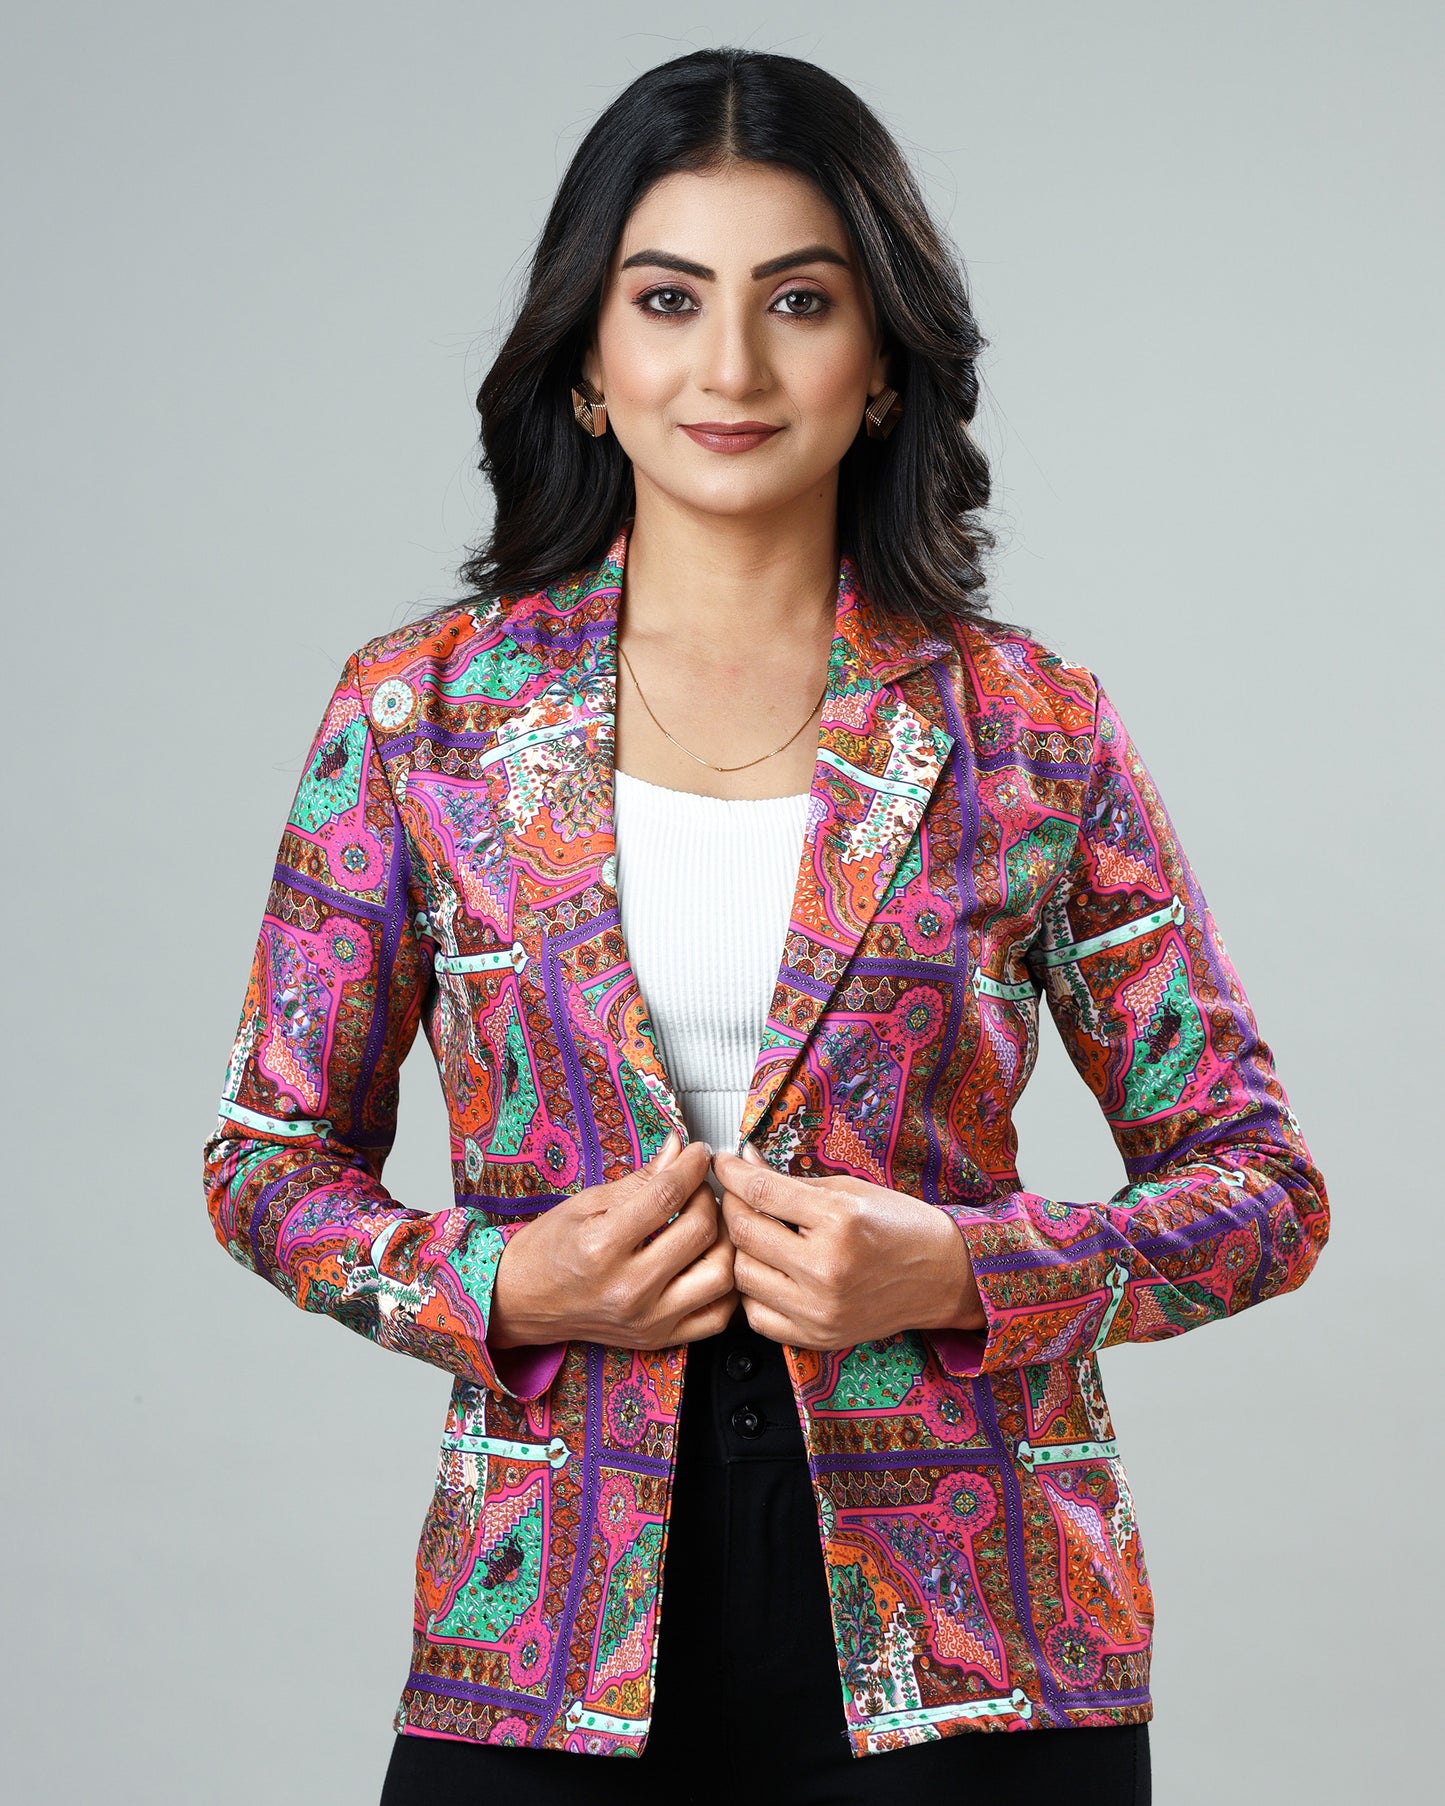 Heritage With Twist: Women's Traditional Jacket